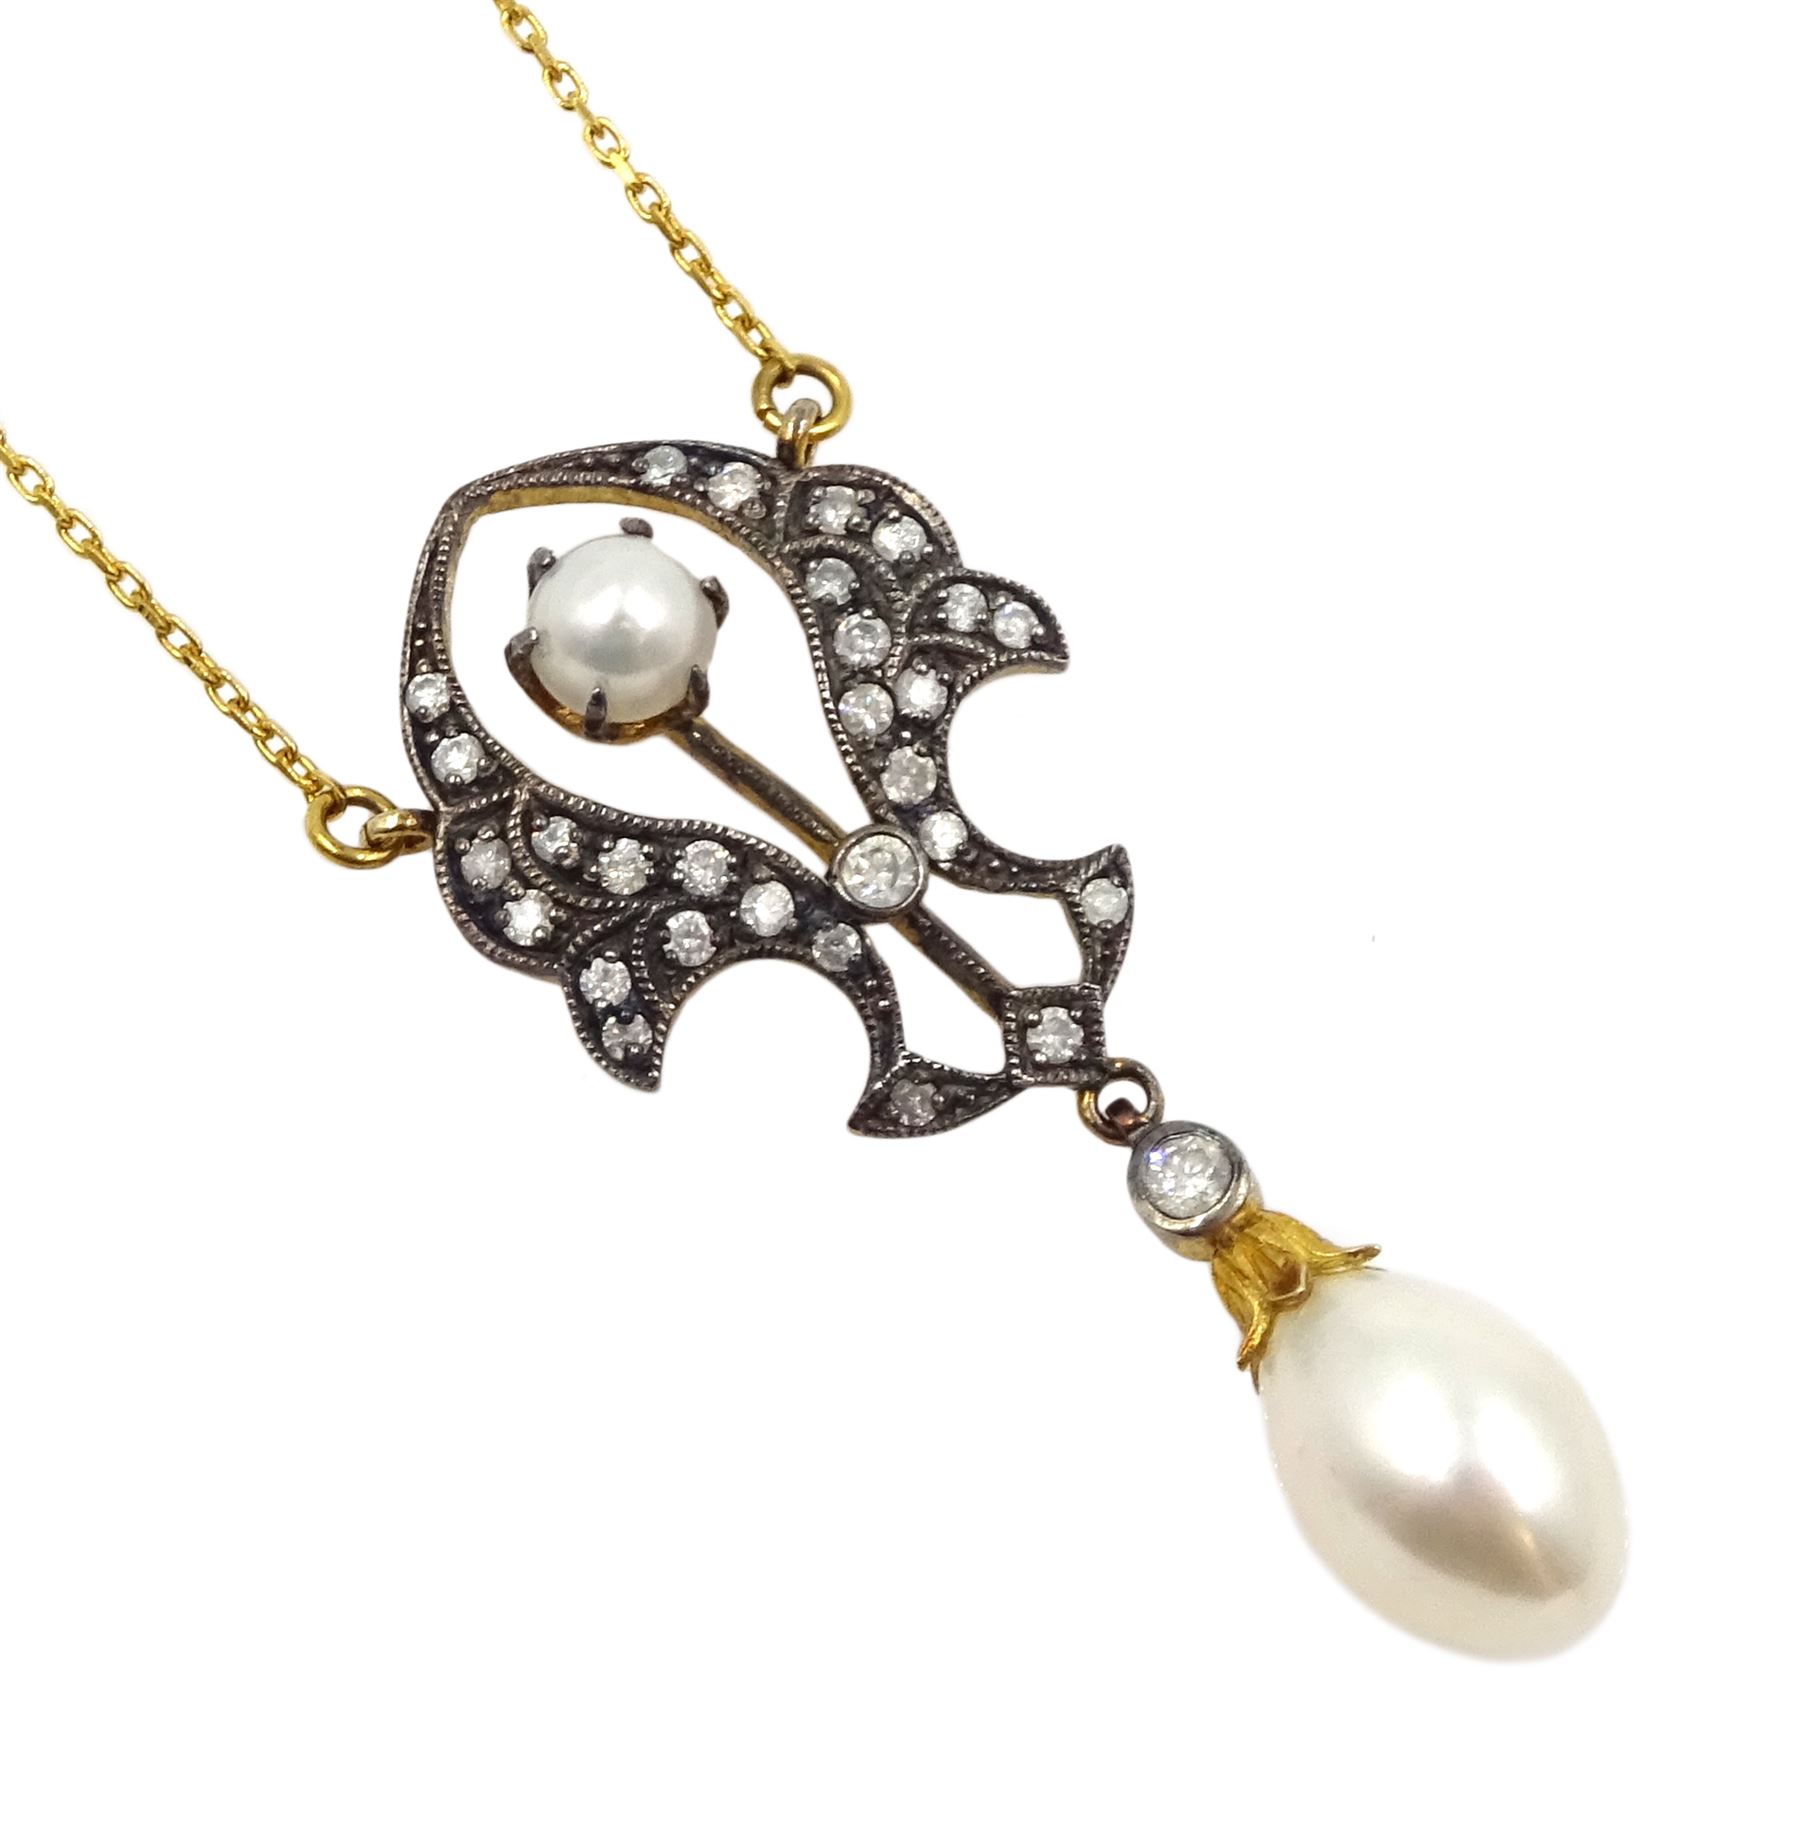 Gold and silver pearl and diamond pendant necklace - Image 2 of 4